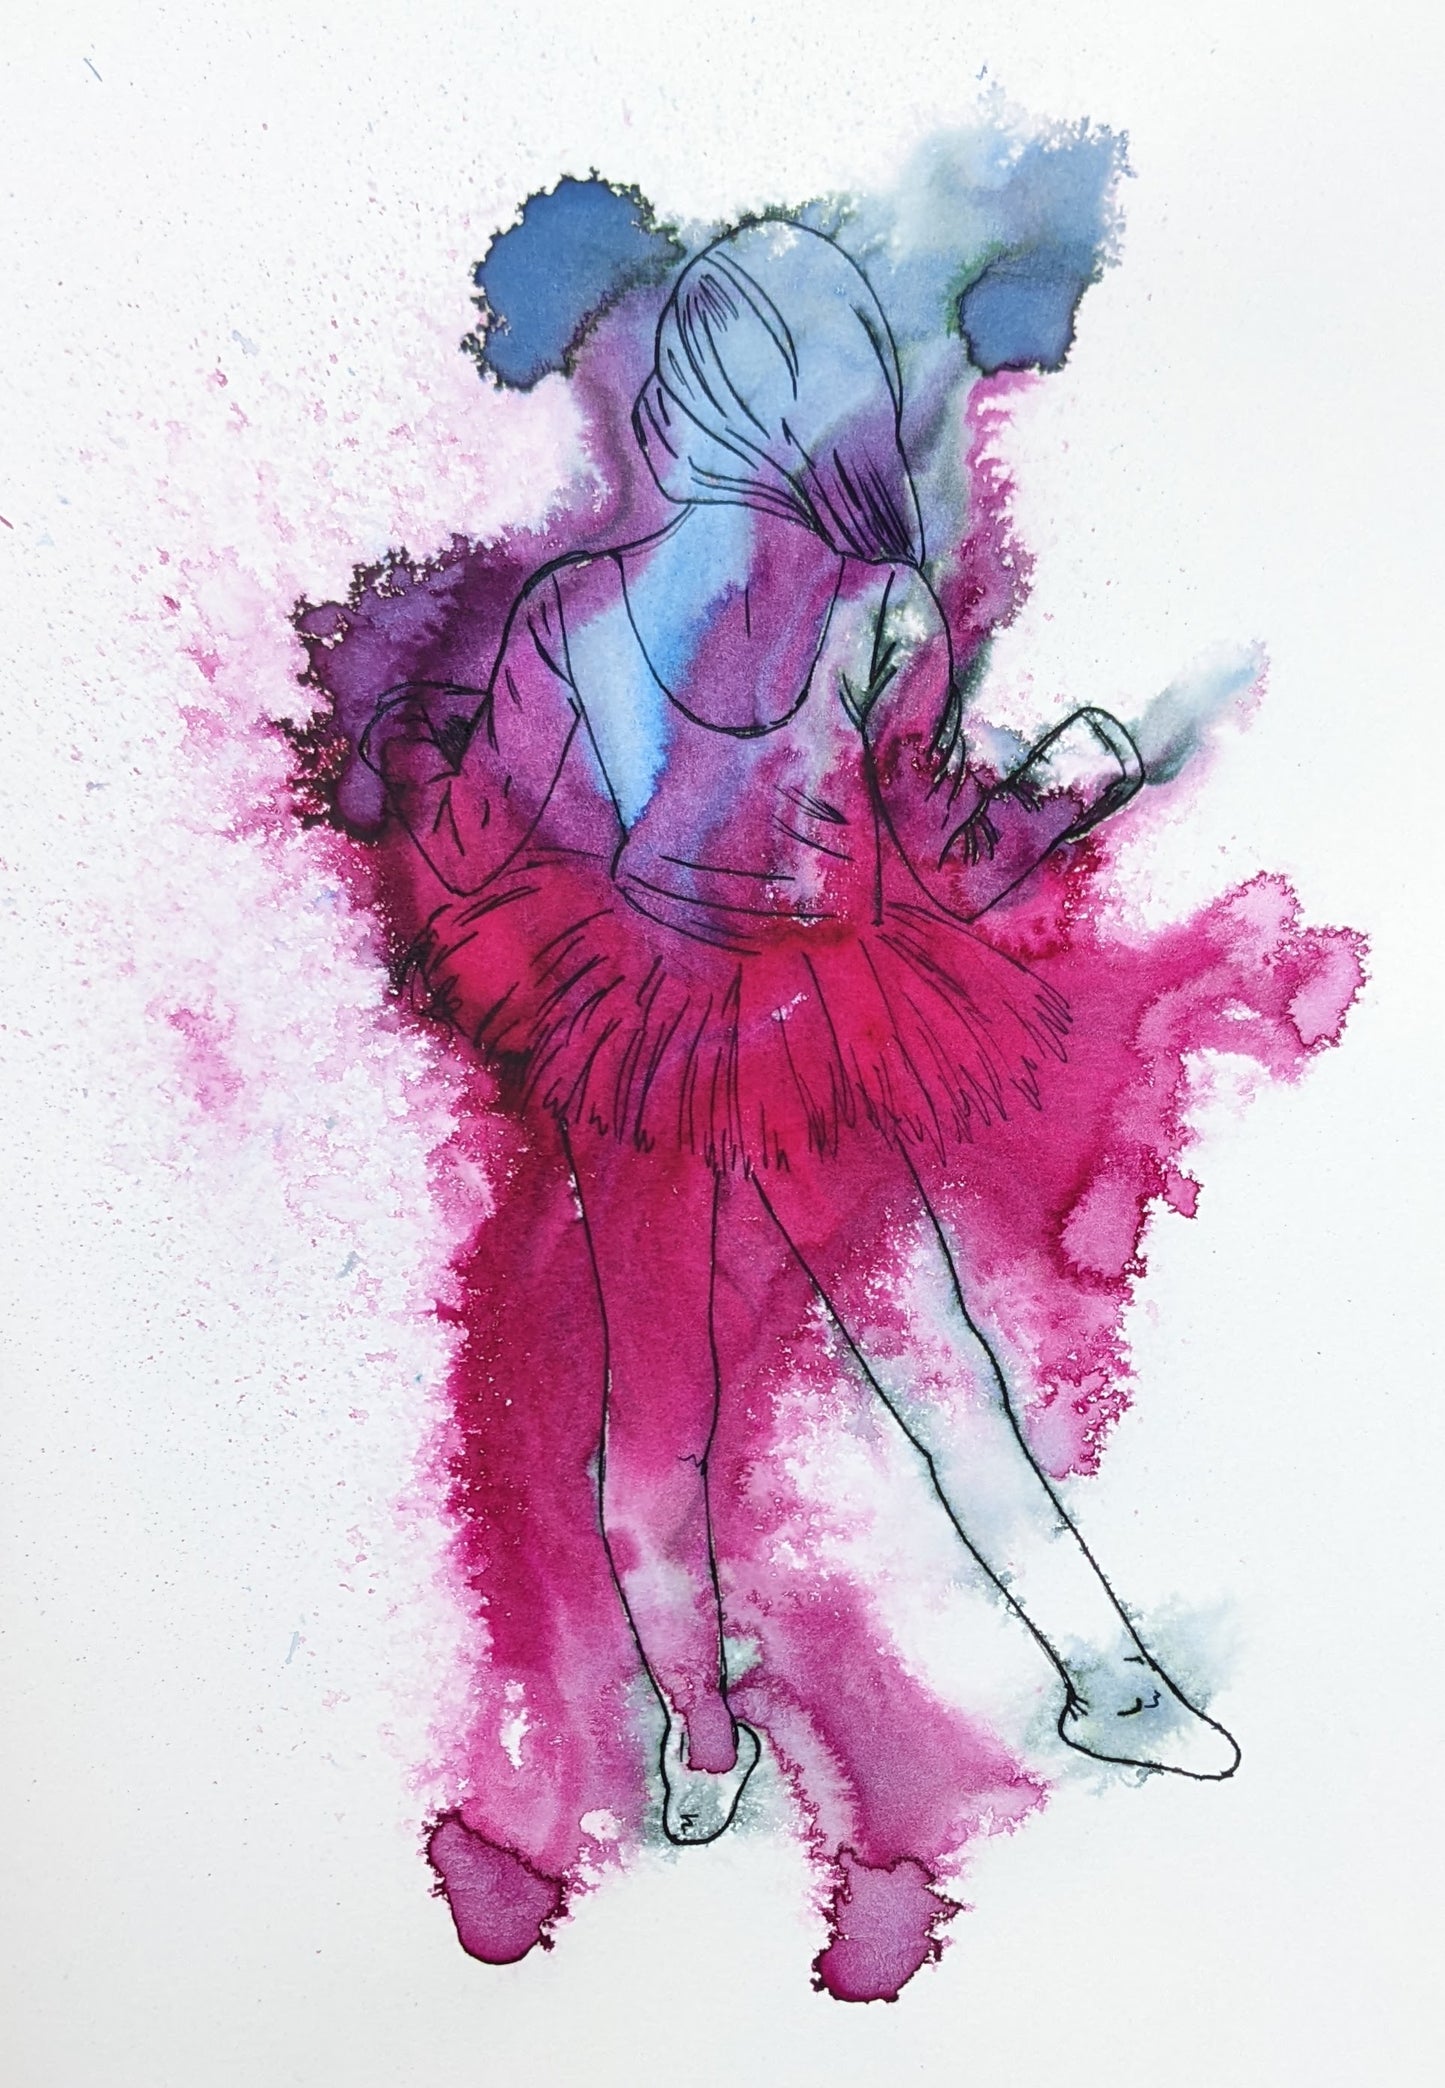 Stunning pink and blue ballet artwork, by British female artist Dianne Bowell.